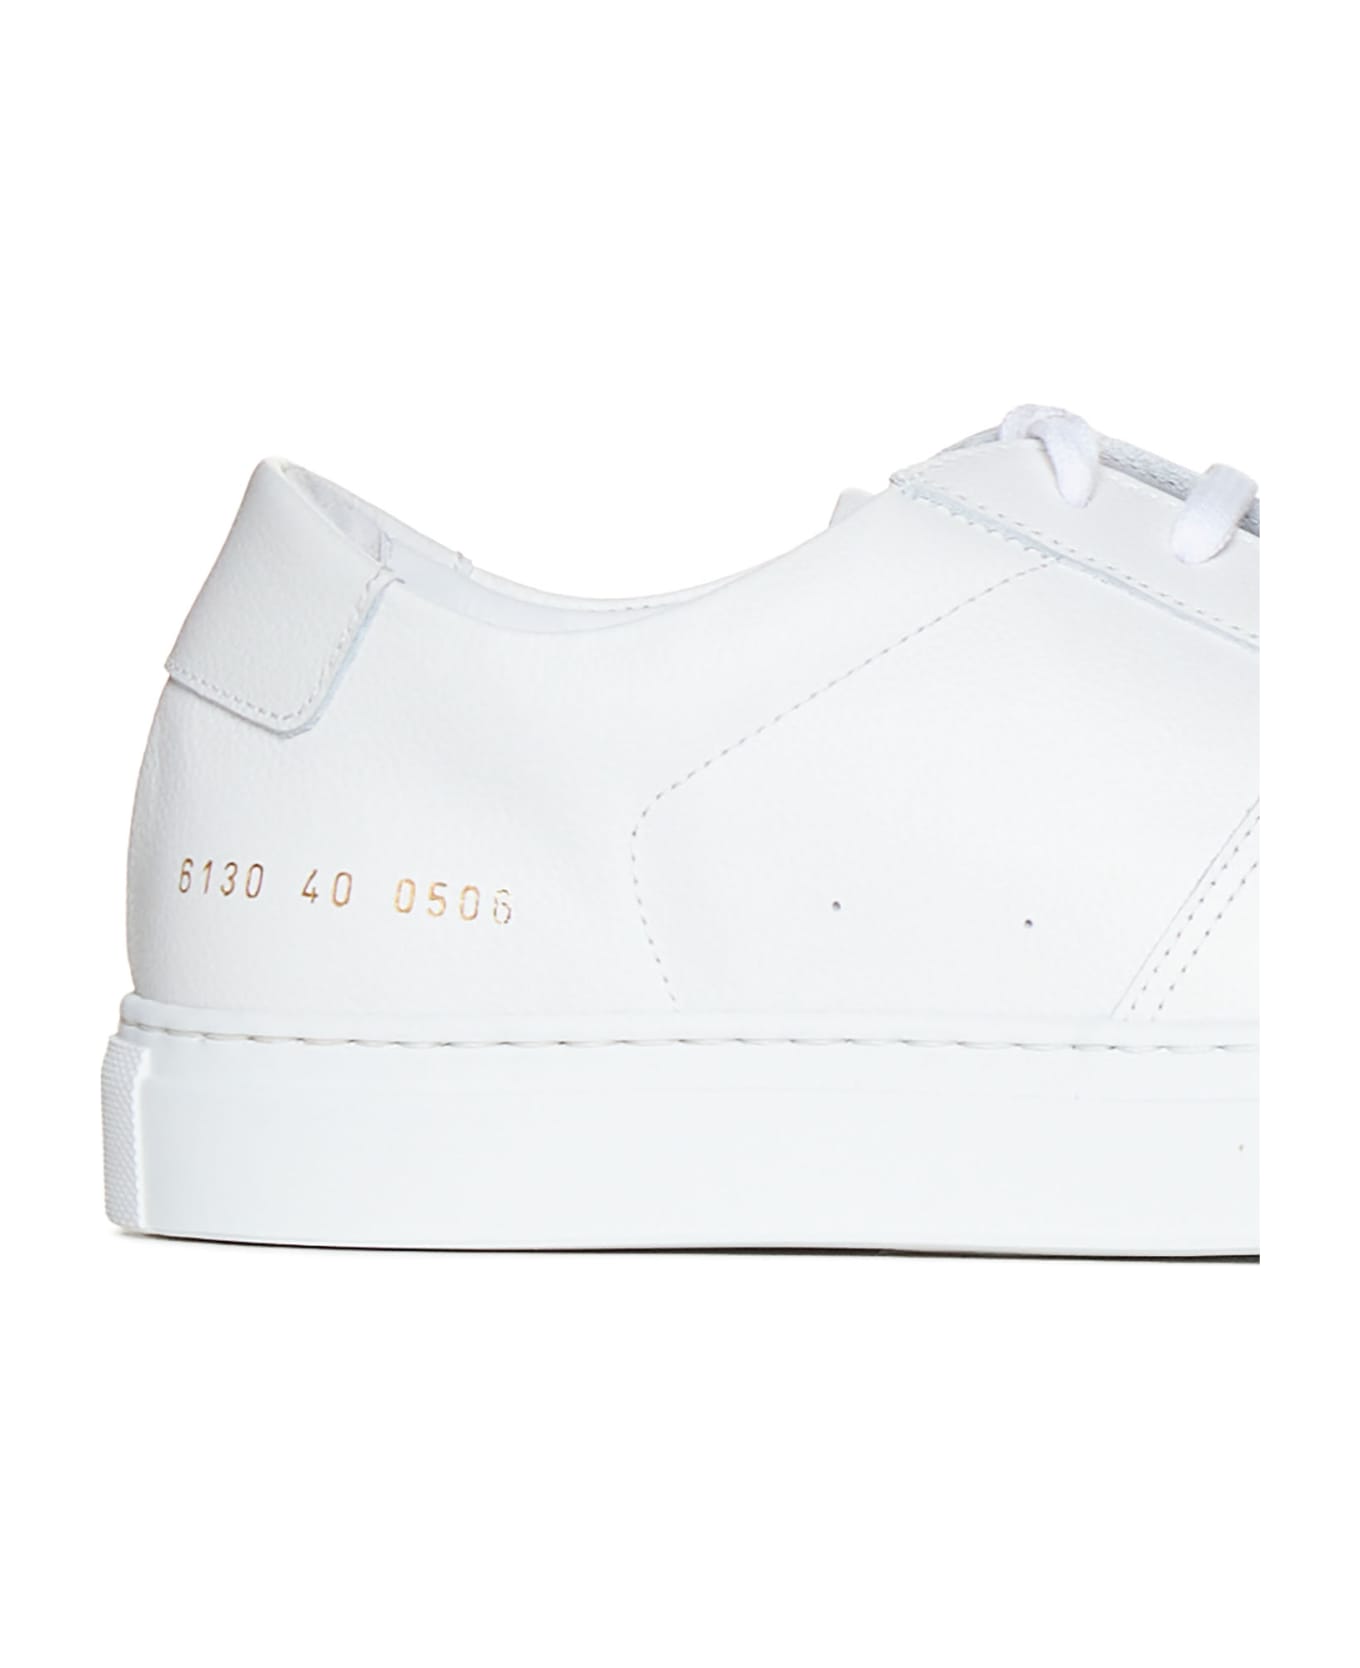 Common Projects Bball Classic Leather Sneakers - White